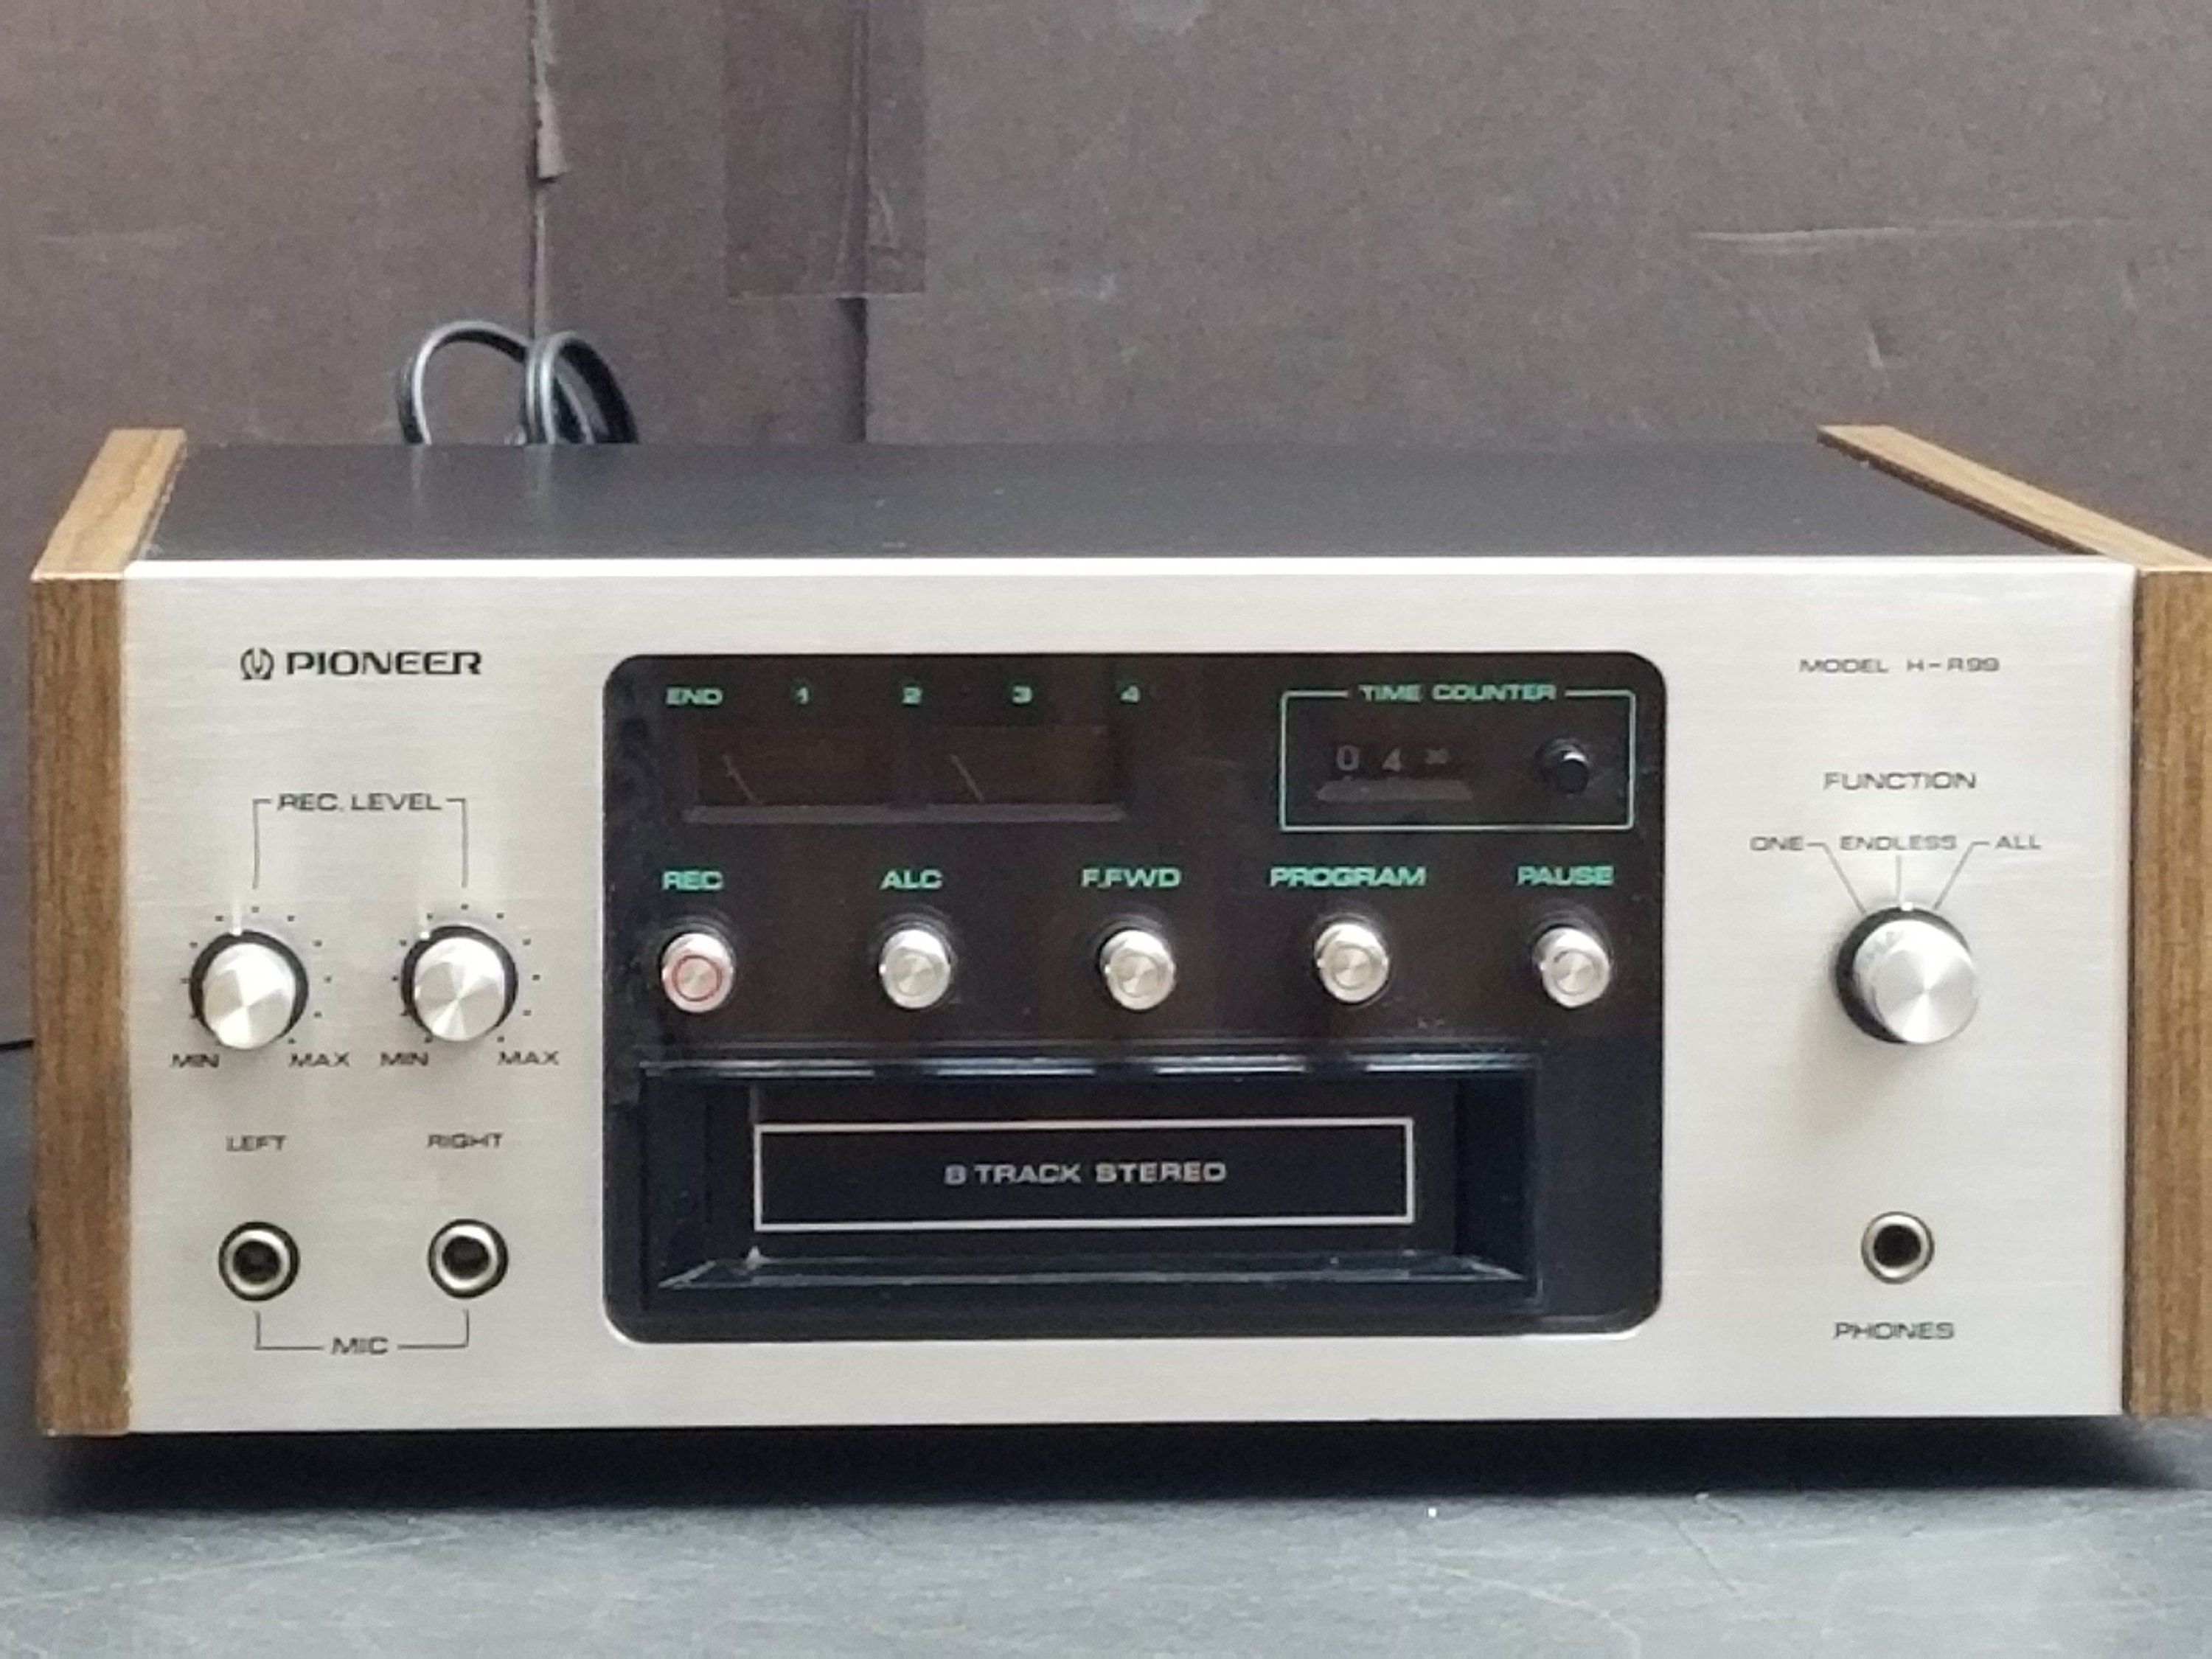 Vintage Pioneer H-R99 8 Track Player & Recorder Tested Working